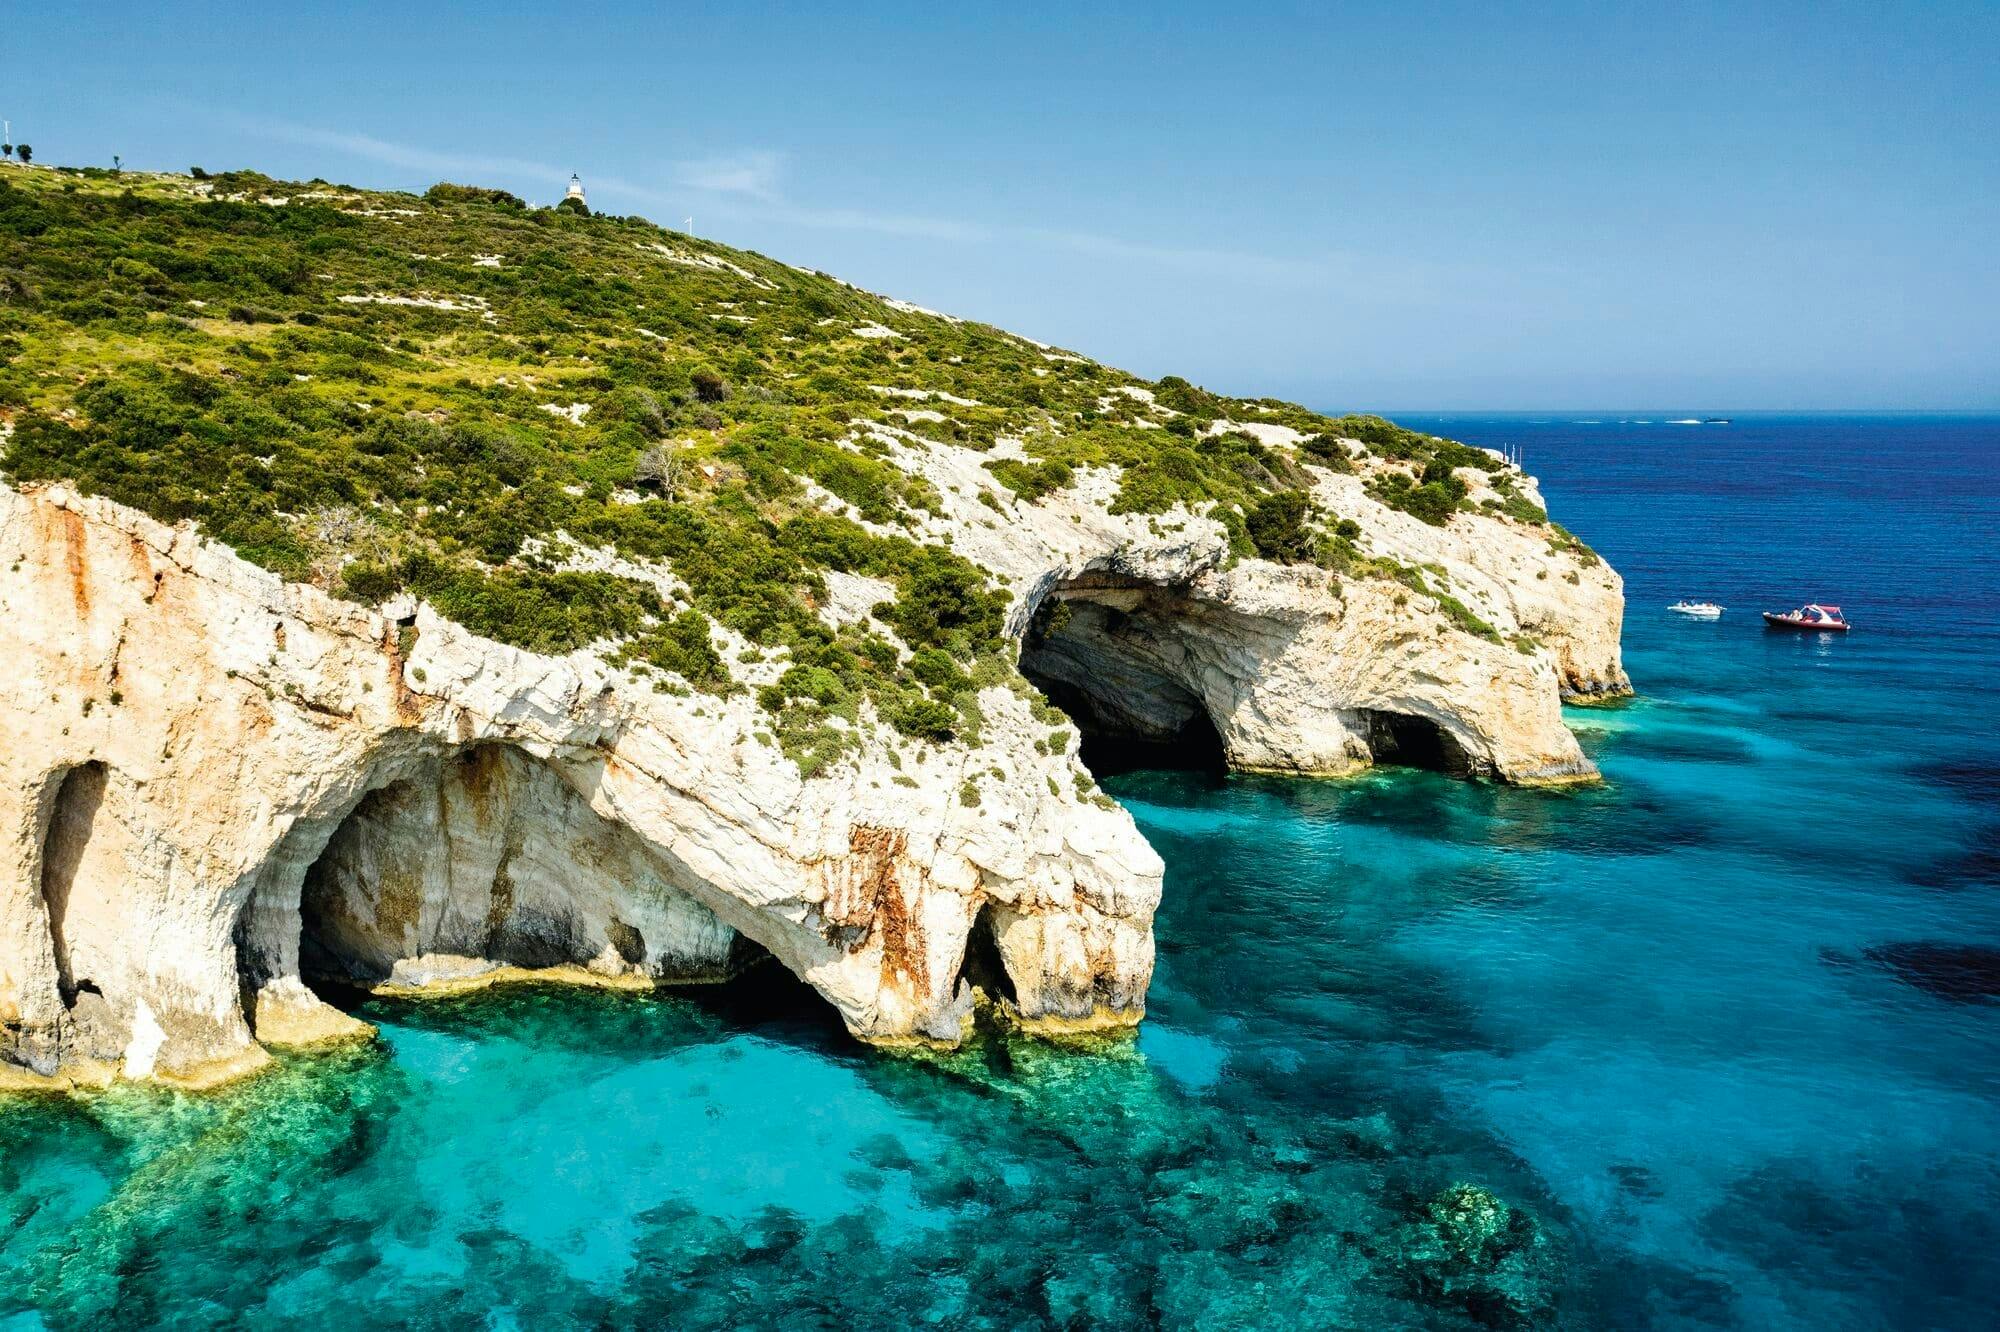 Secret Zante Tour with Monastery, Blue Caves and Local Speciality Tastings